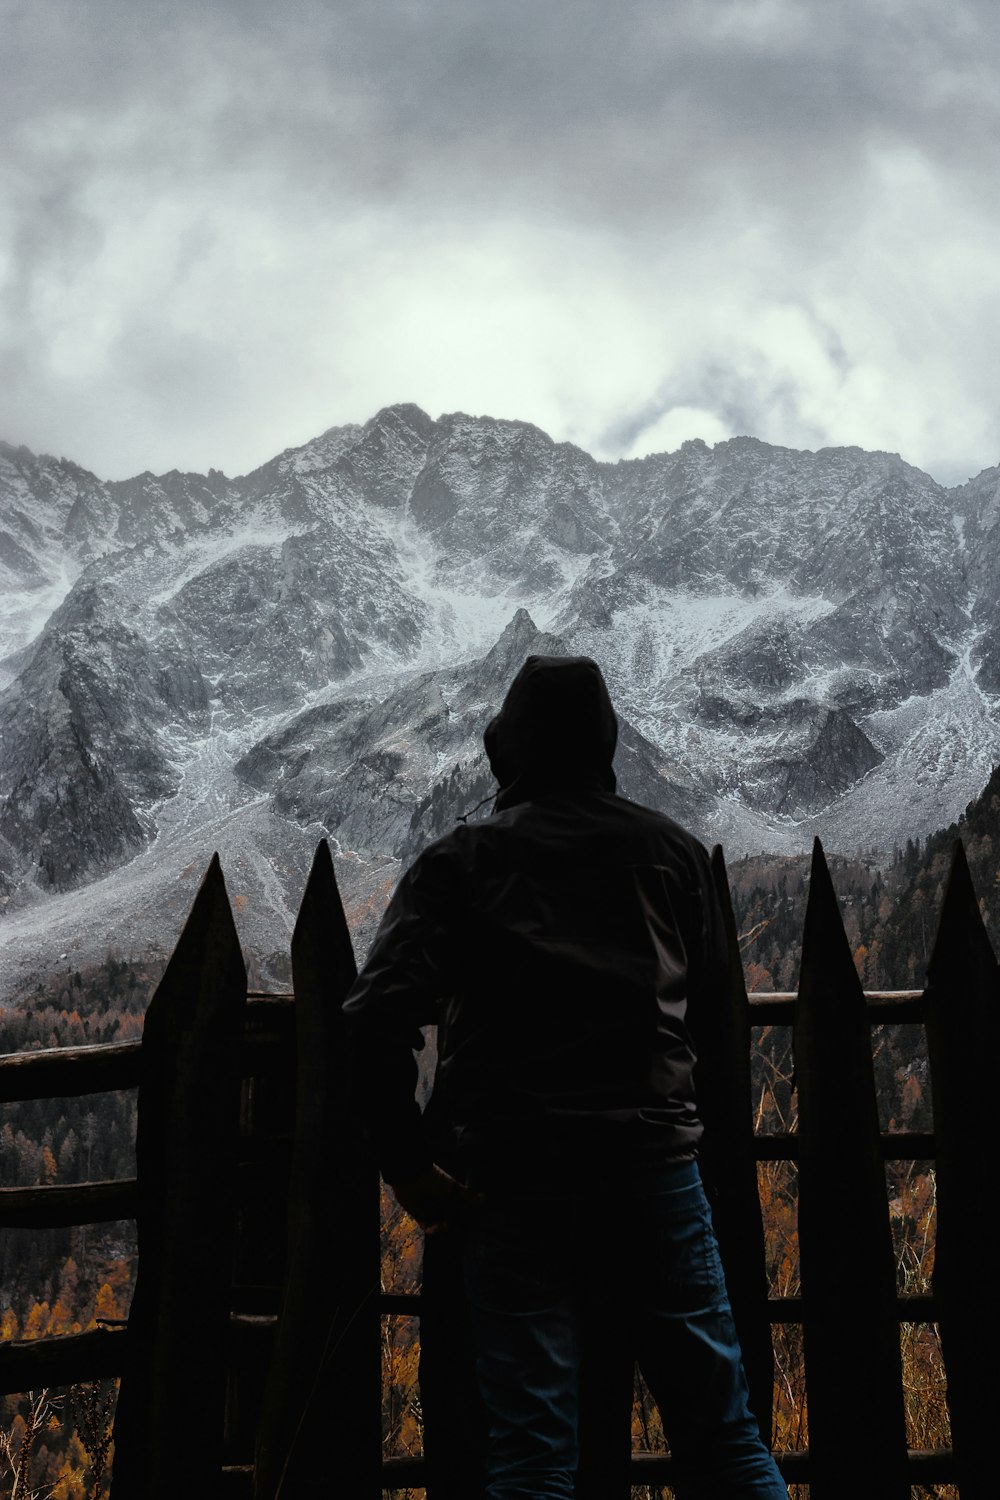 silhouette of person standing in front fence with a scene of mountains